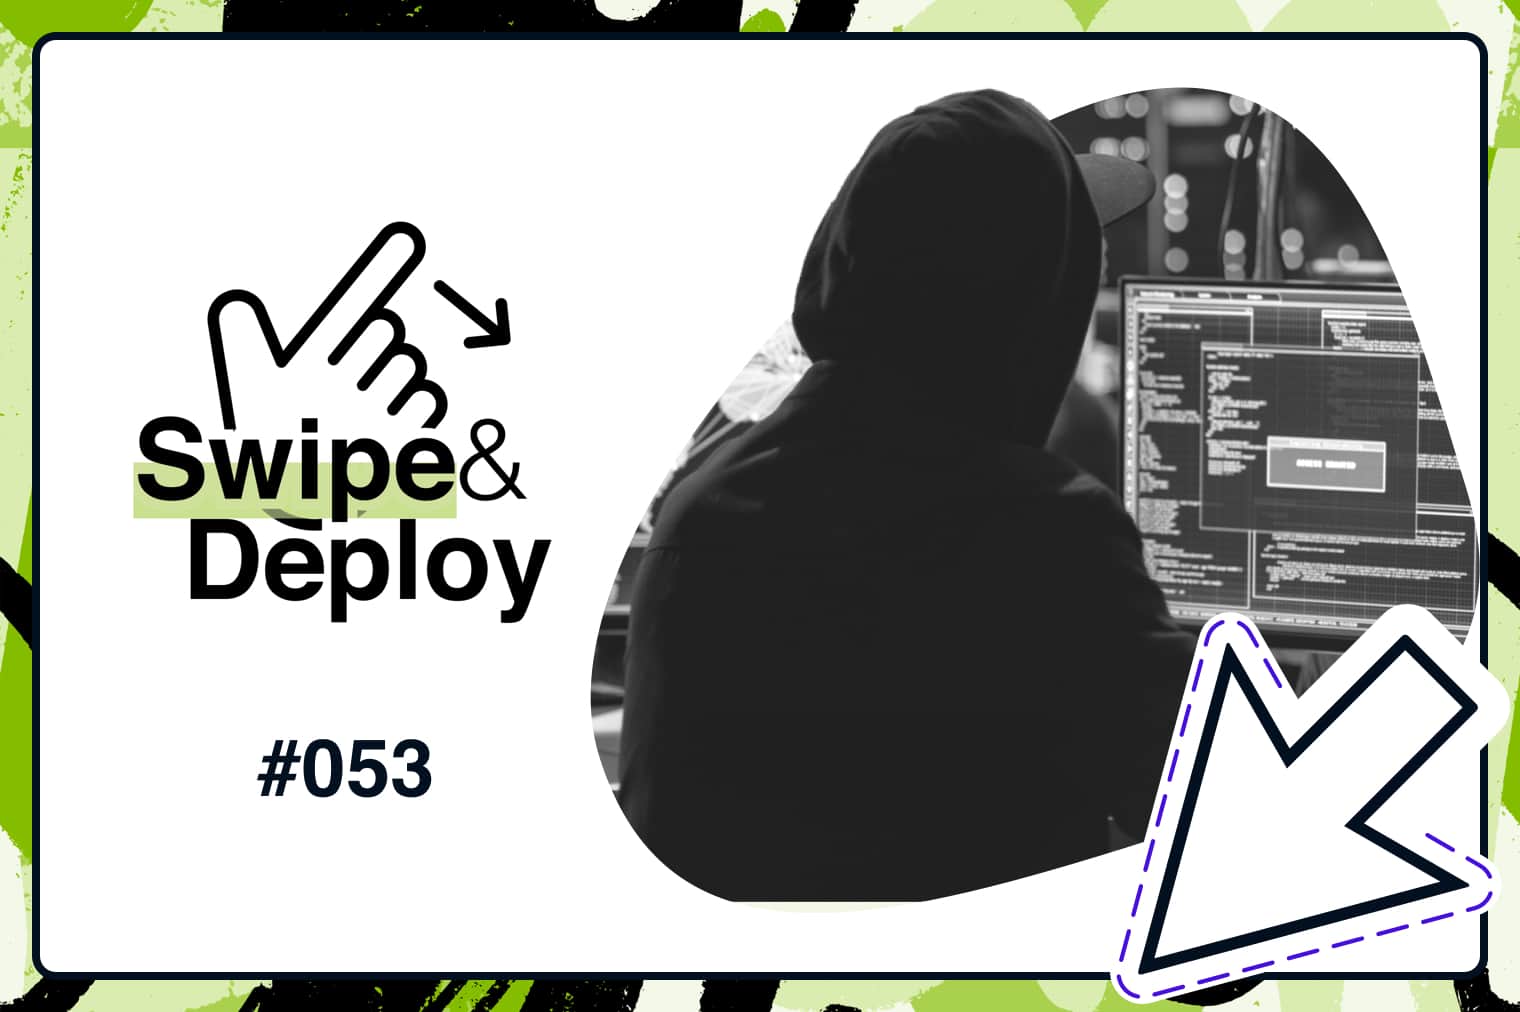 Swipe & Deploy 53 blog hero image of a hacker at a computer.